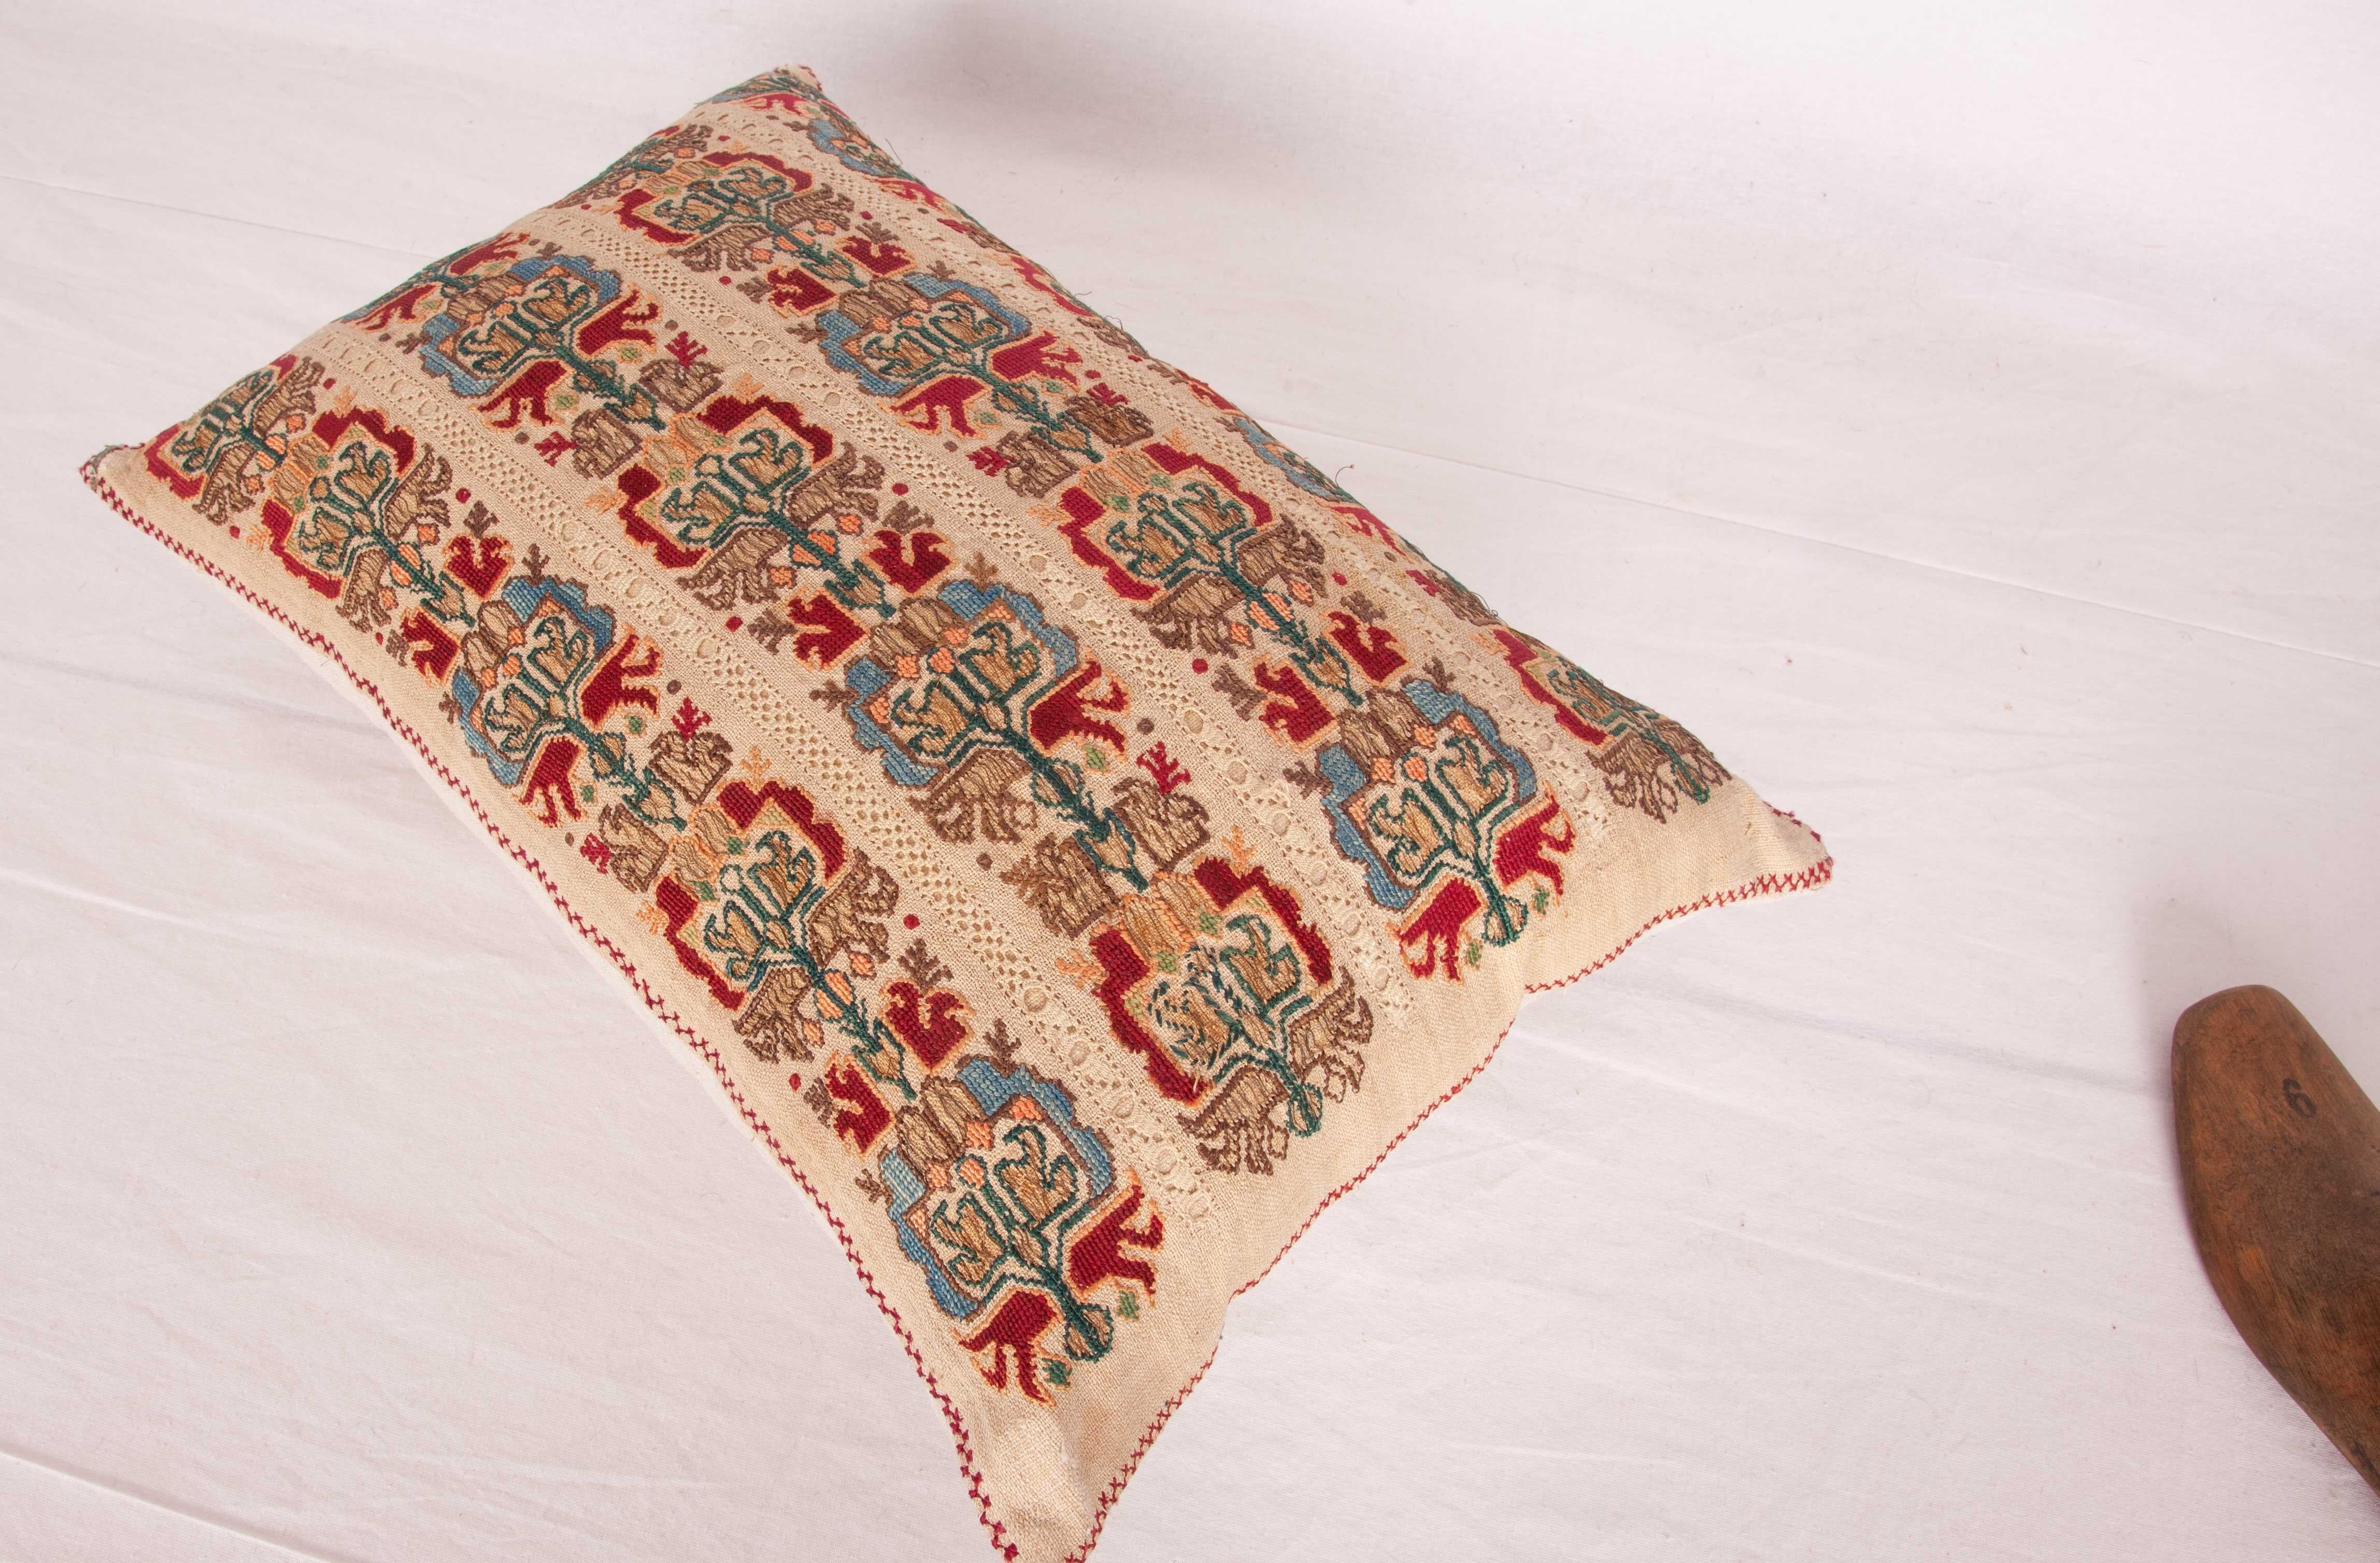 Embroidered Antique Pillow Case Fashioned from an Ottoman Greek Embroidery, 19th Century